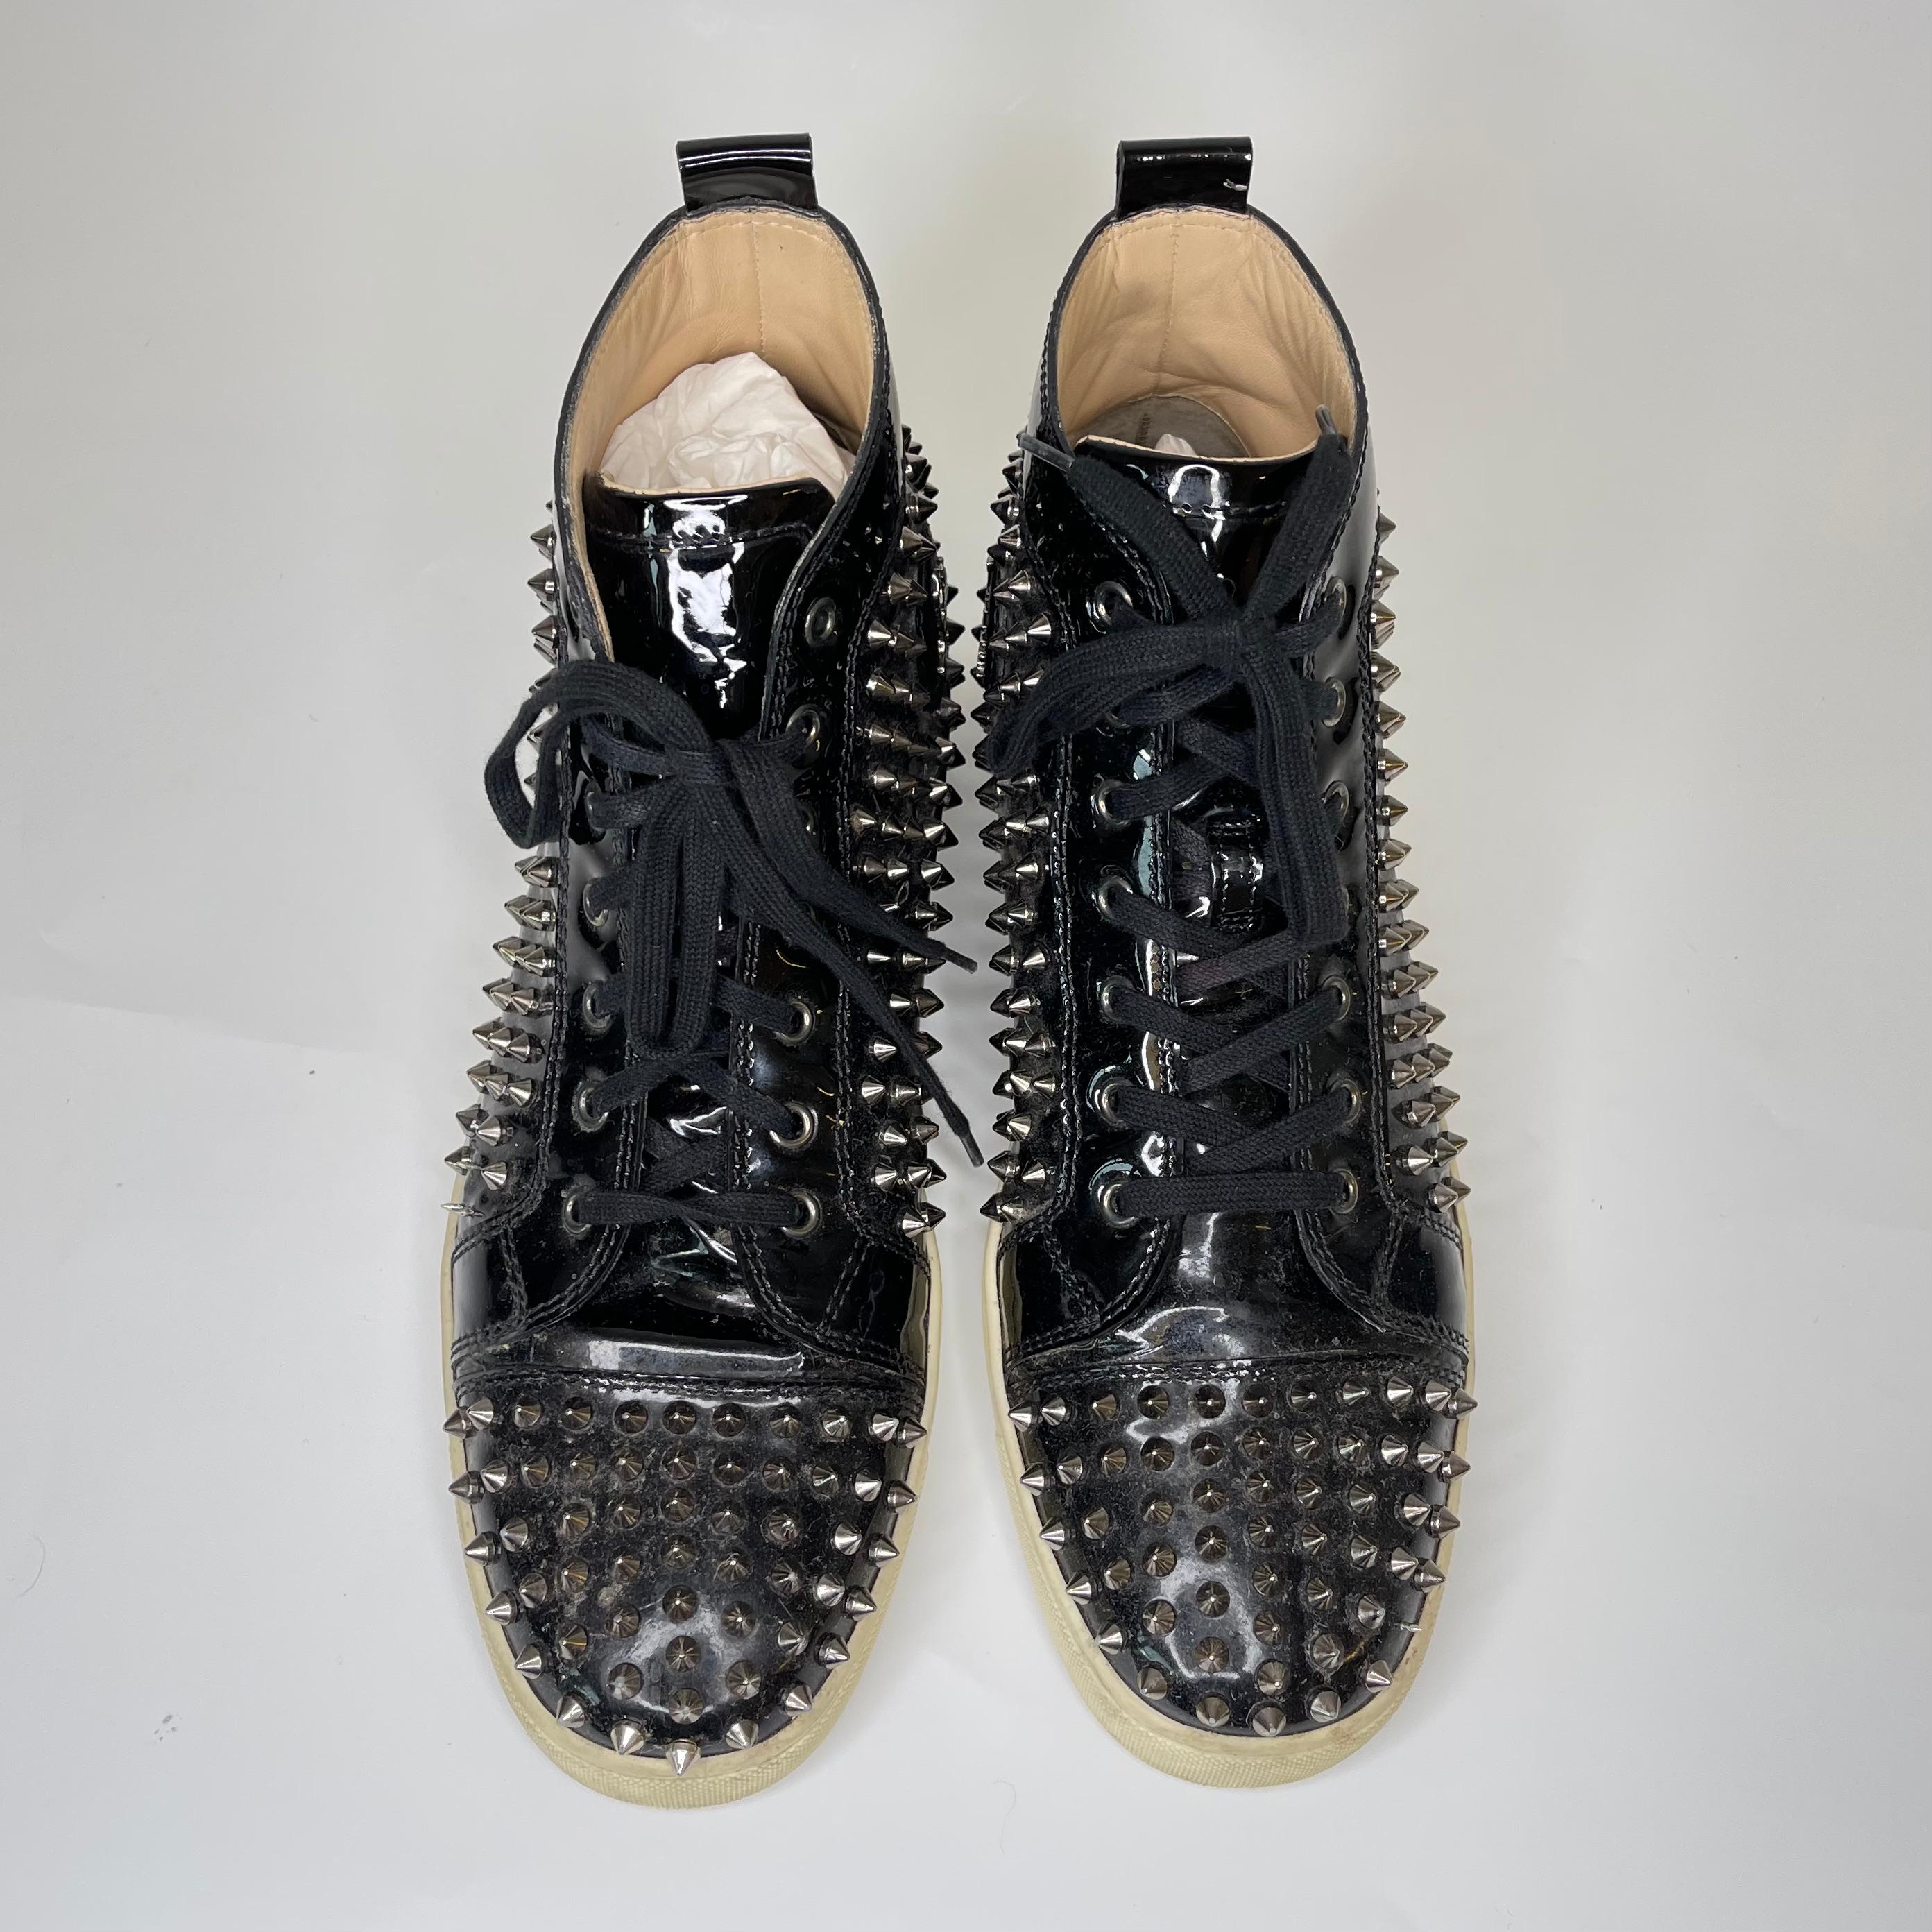 Christian Louboutin Pik Pik Flat Nappa Laminato High Top Sneakers (44.5 EU) In Good Condition For Sale In Montreal, Quebec